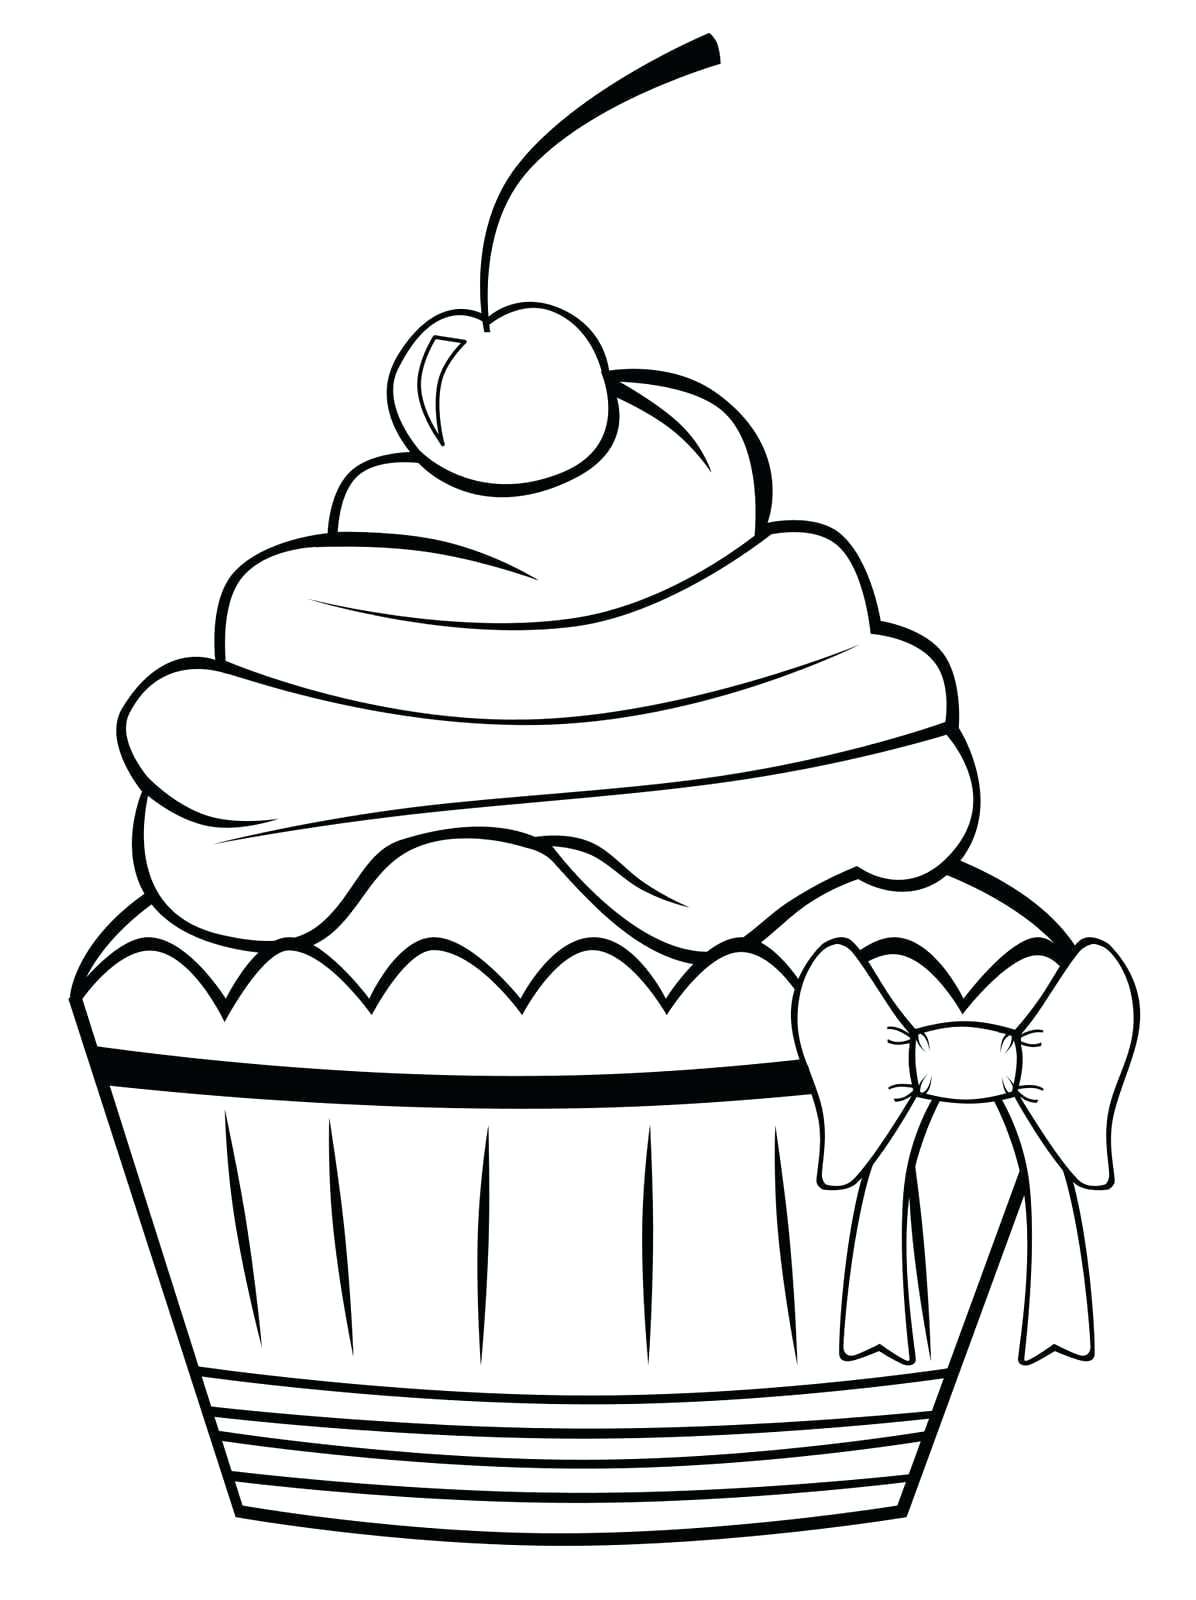 sweets coloring pages – mayhemcolor.co